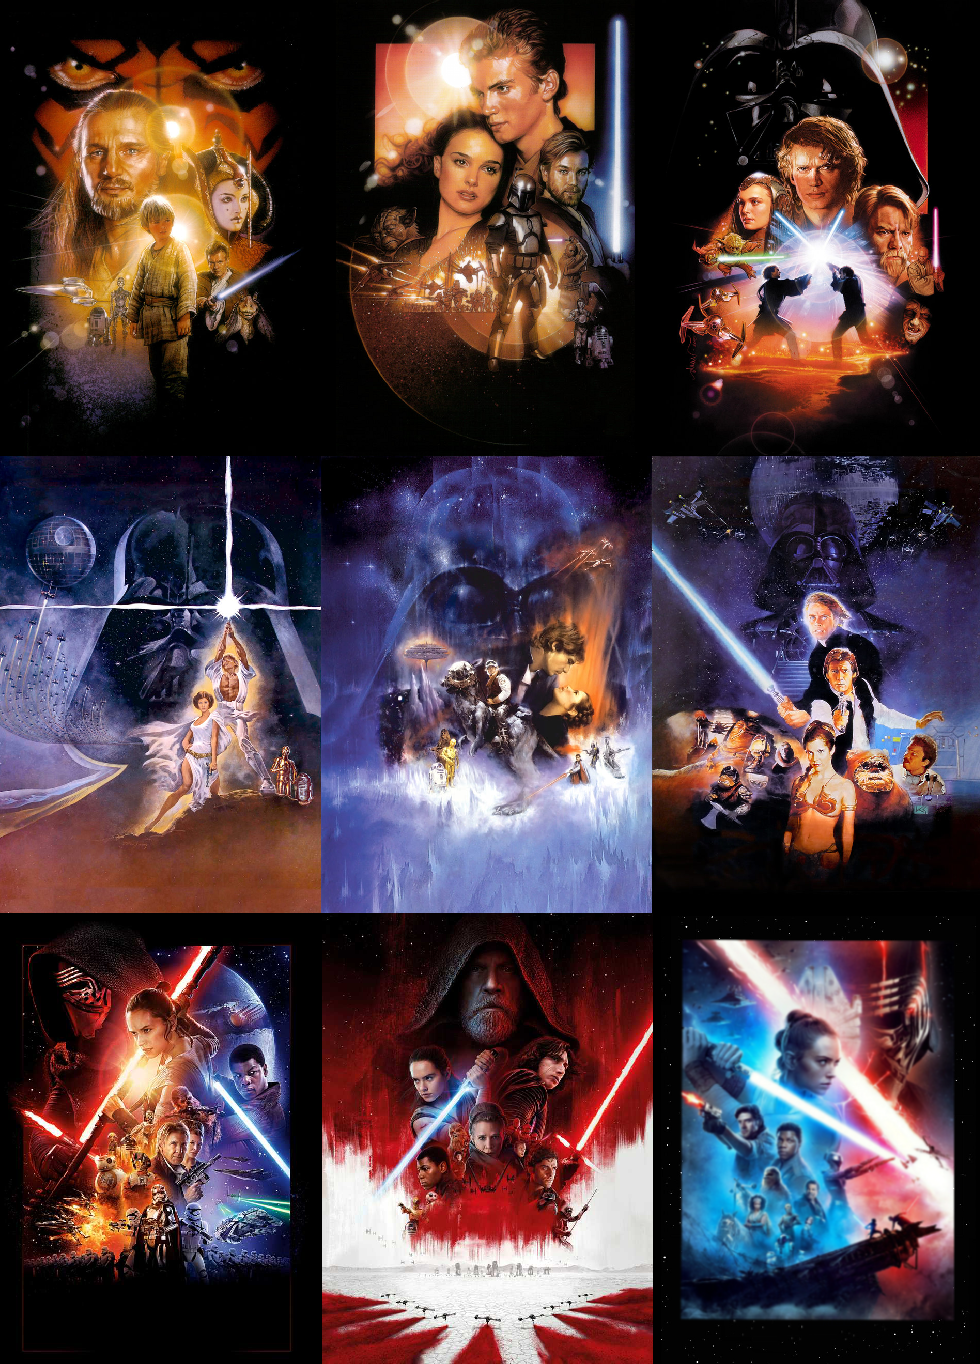 star wars wallpaper border, poster, art, collage, graphic design, movie, cg artwork, photography, album cover, fictional character, graphics